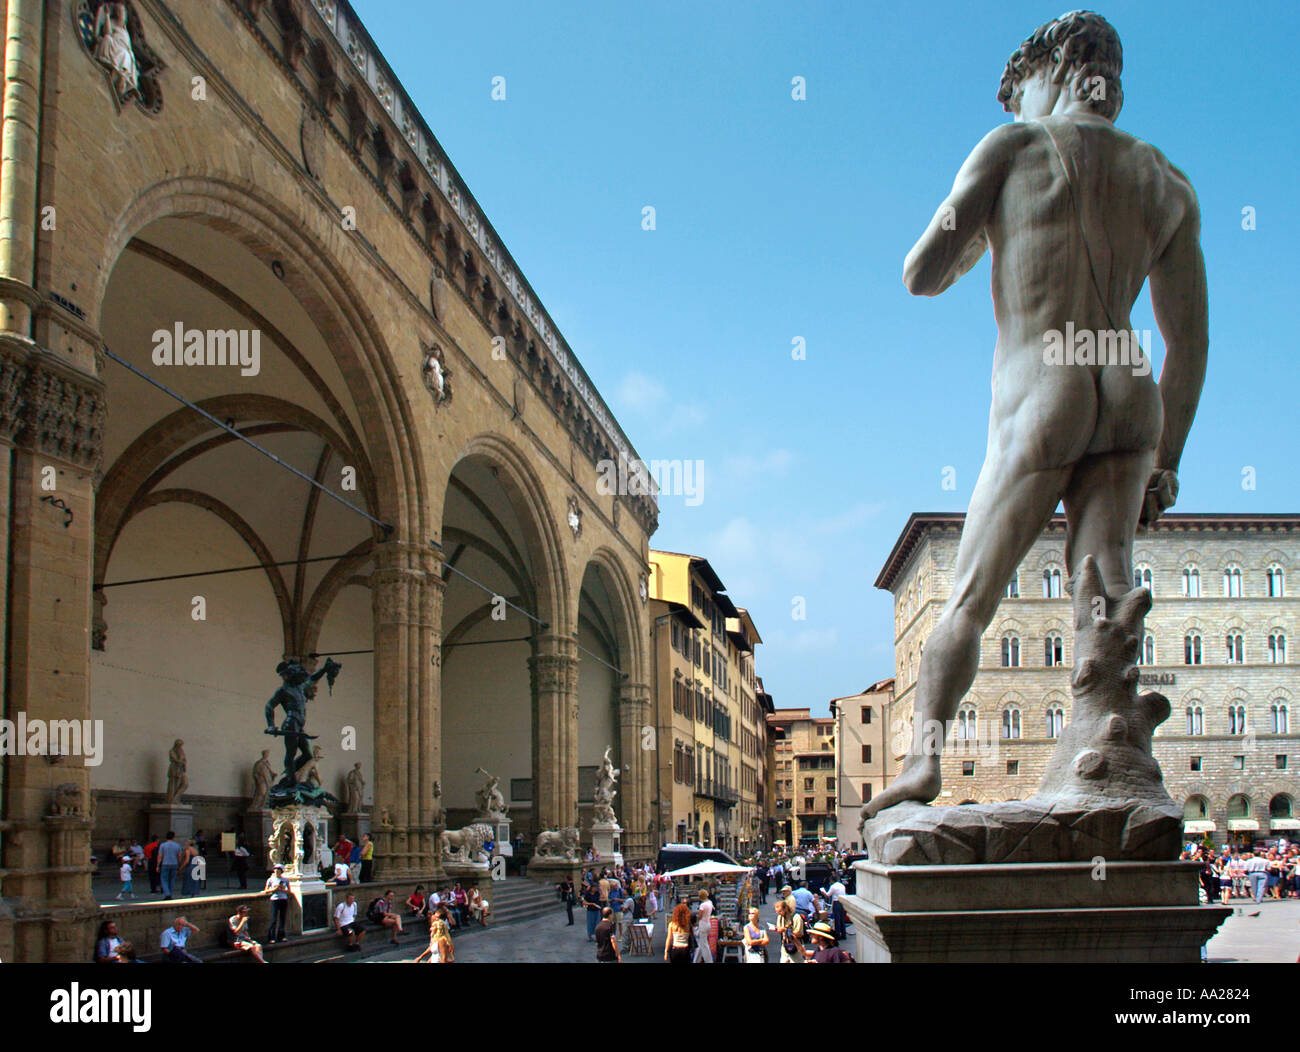 Piazza della Signoria with a copy of Michelangelo's State of David in the foreground, Florence, Tuscany, Italy Stock Photo